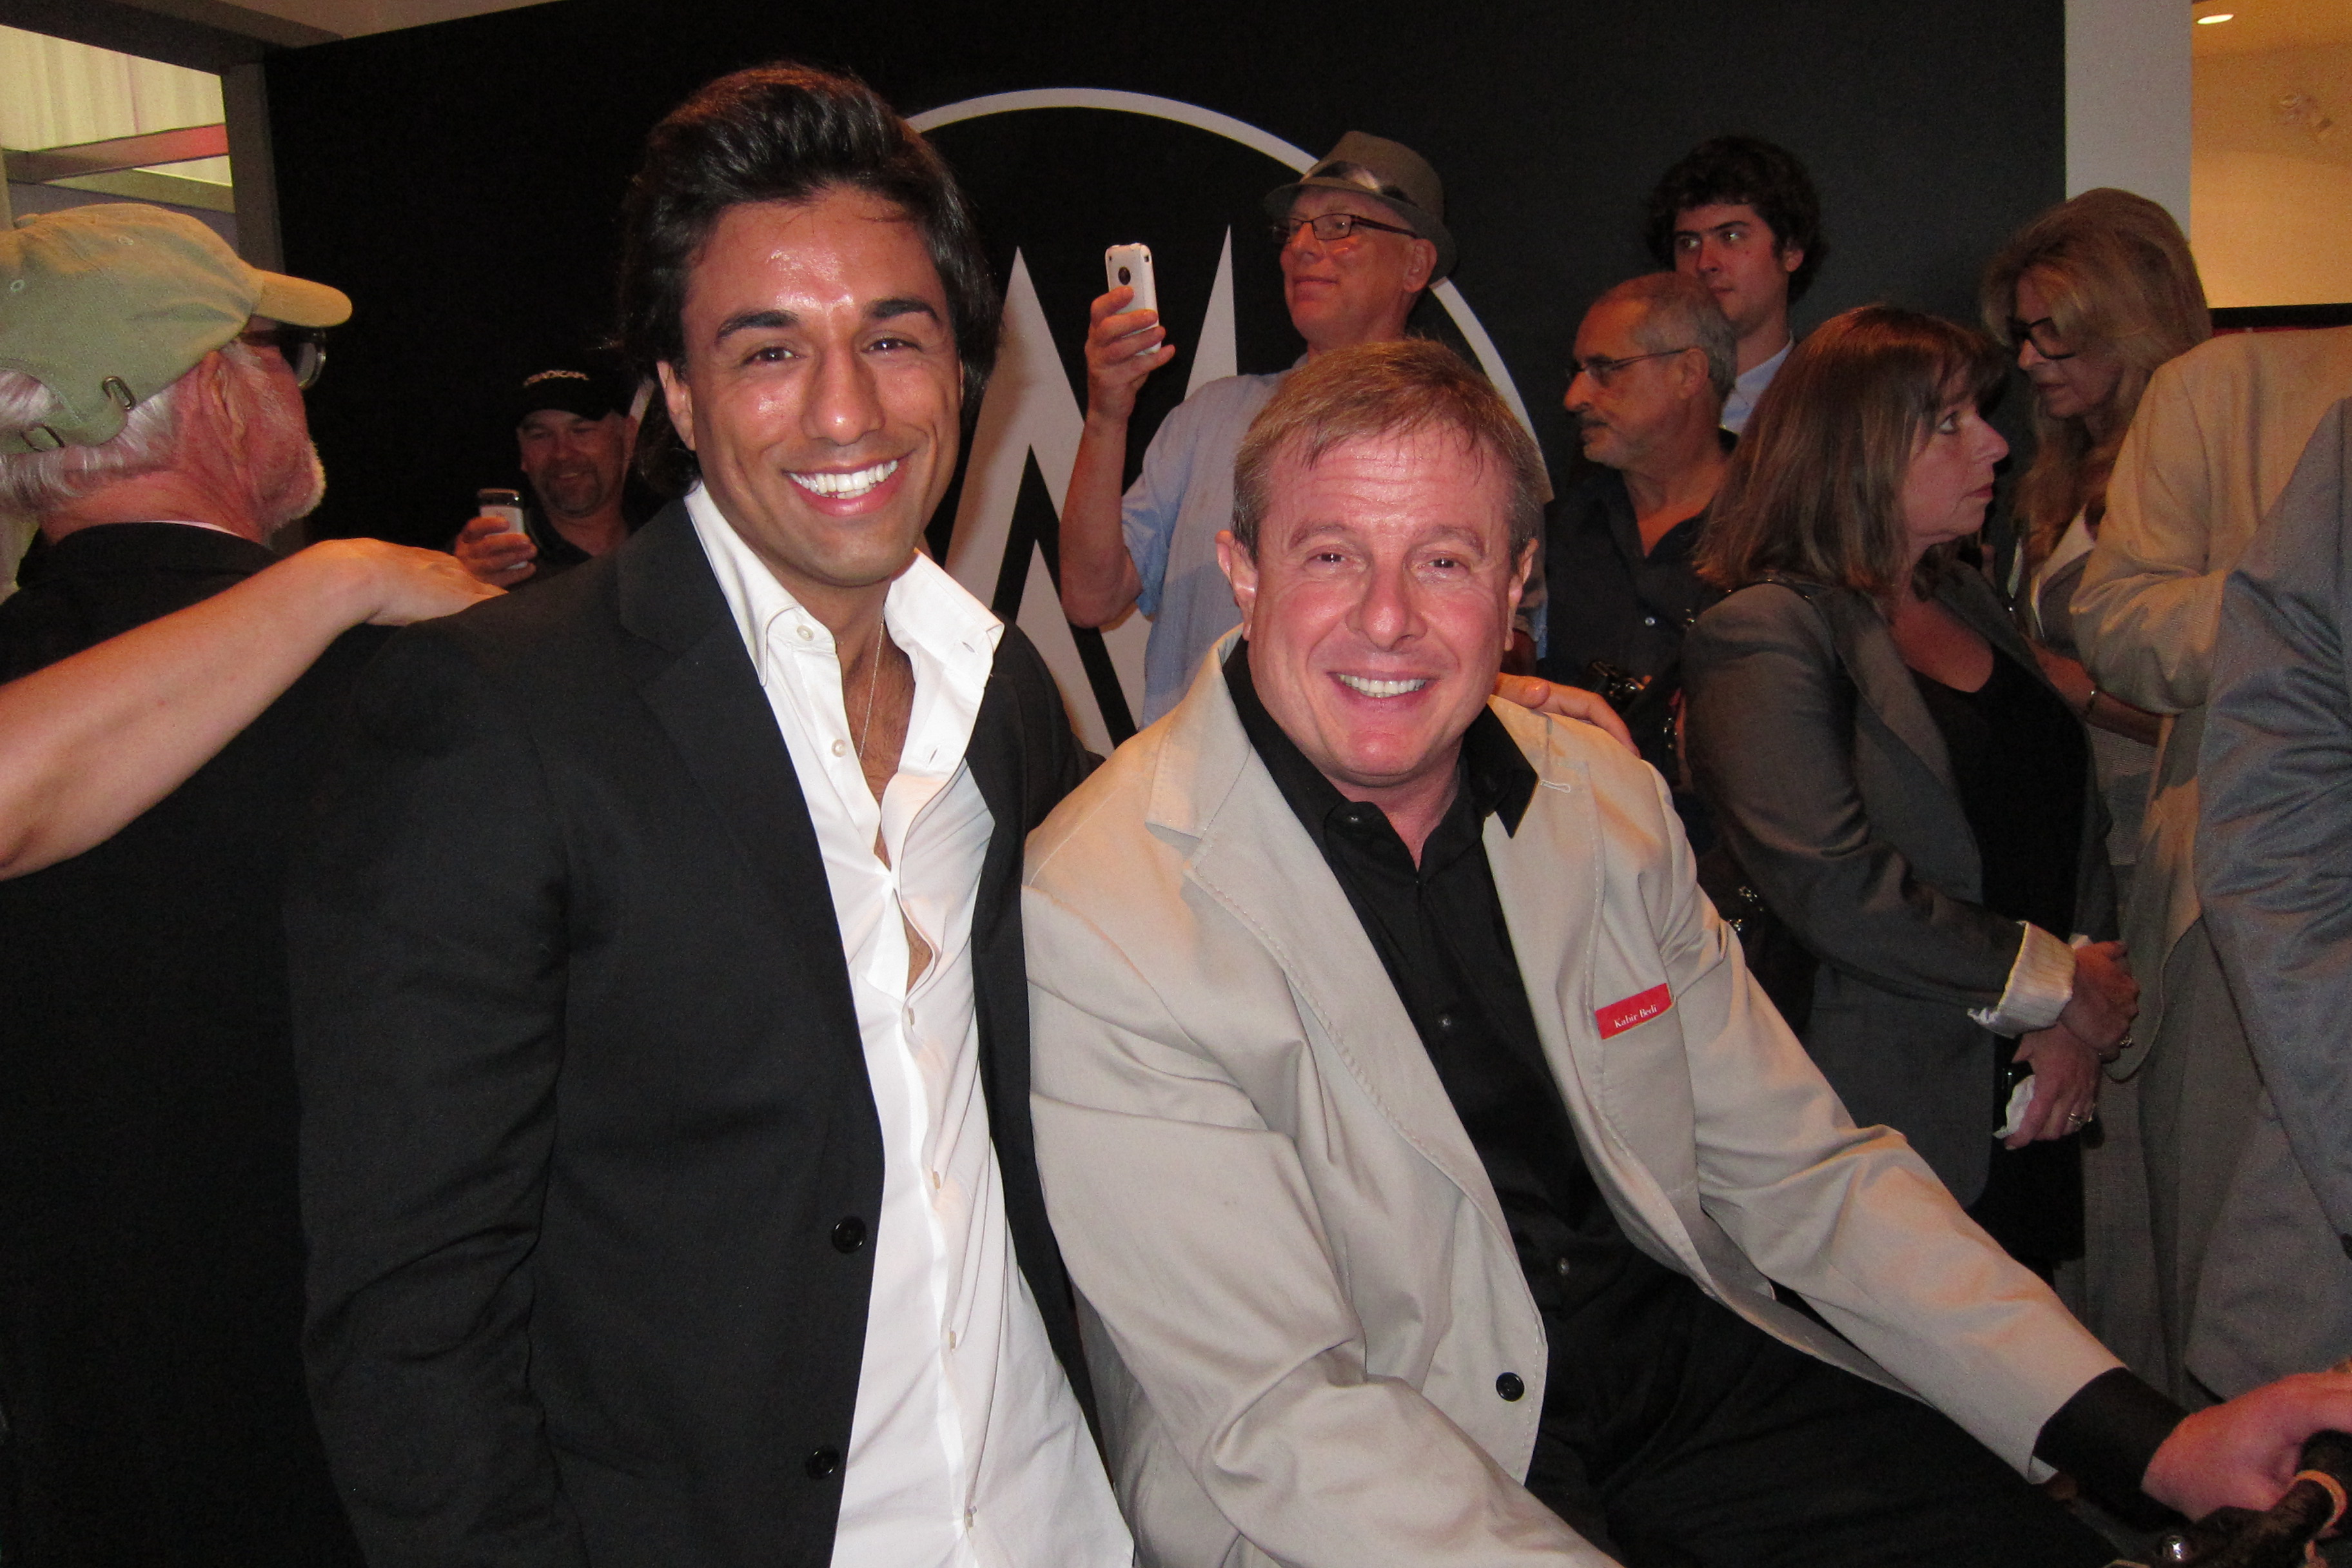 Paul Bronfman, Chairman and CEO of Comweb Group Inc. and William F. White International Inc. Mani Nasry